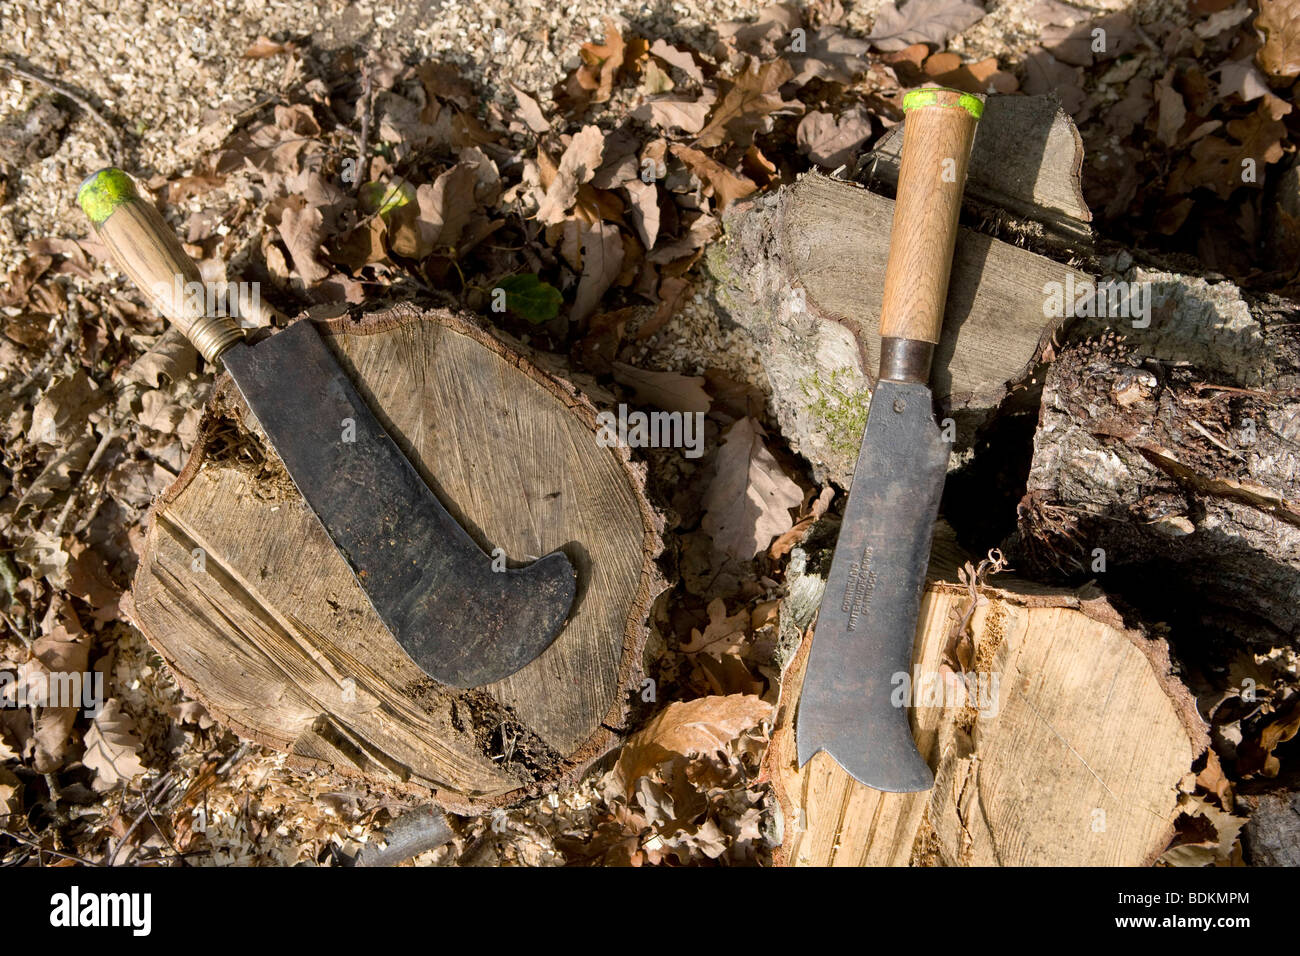 Billhook High Resolution Stock Photography and Images - Alamy